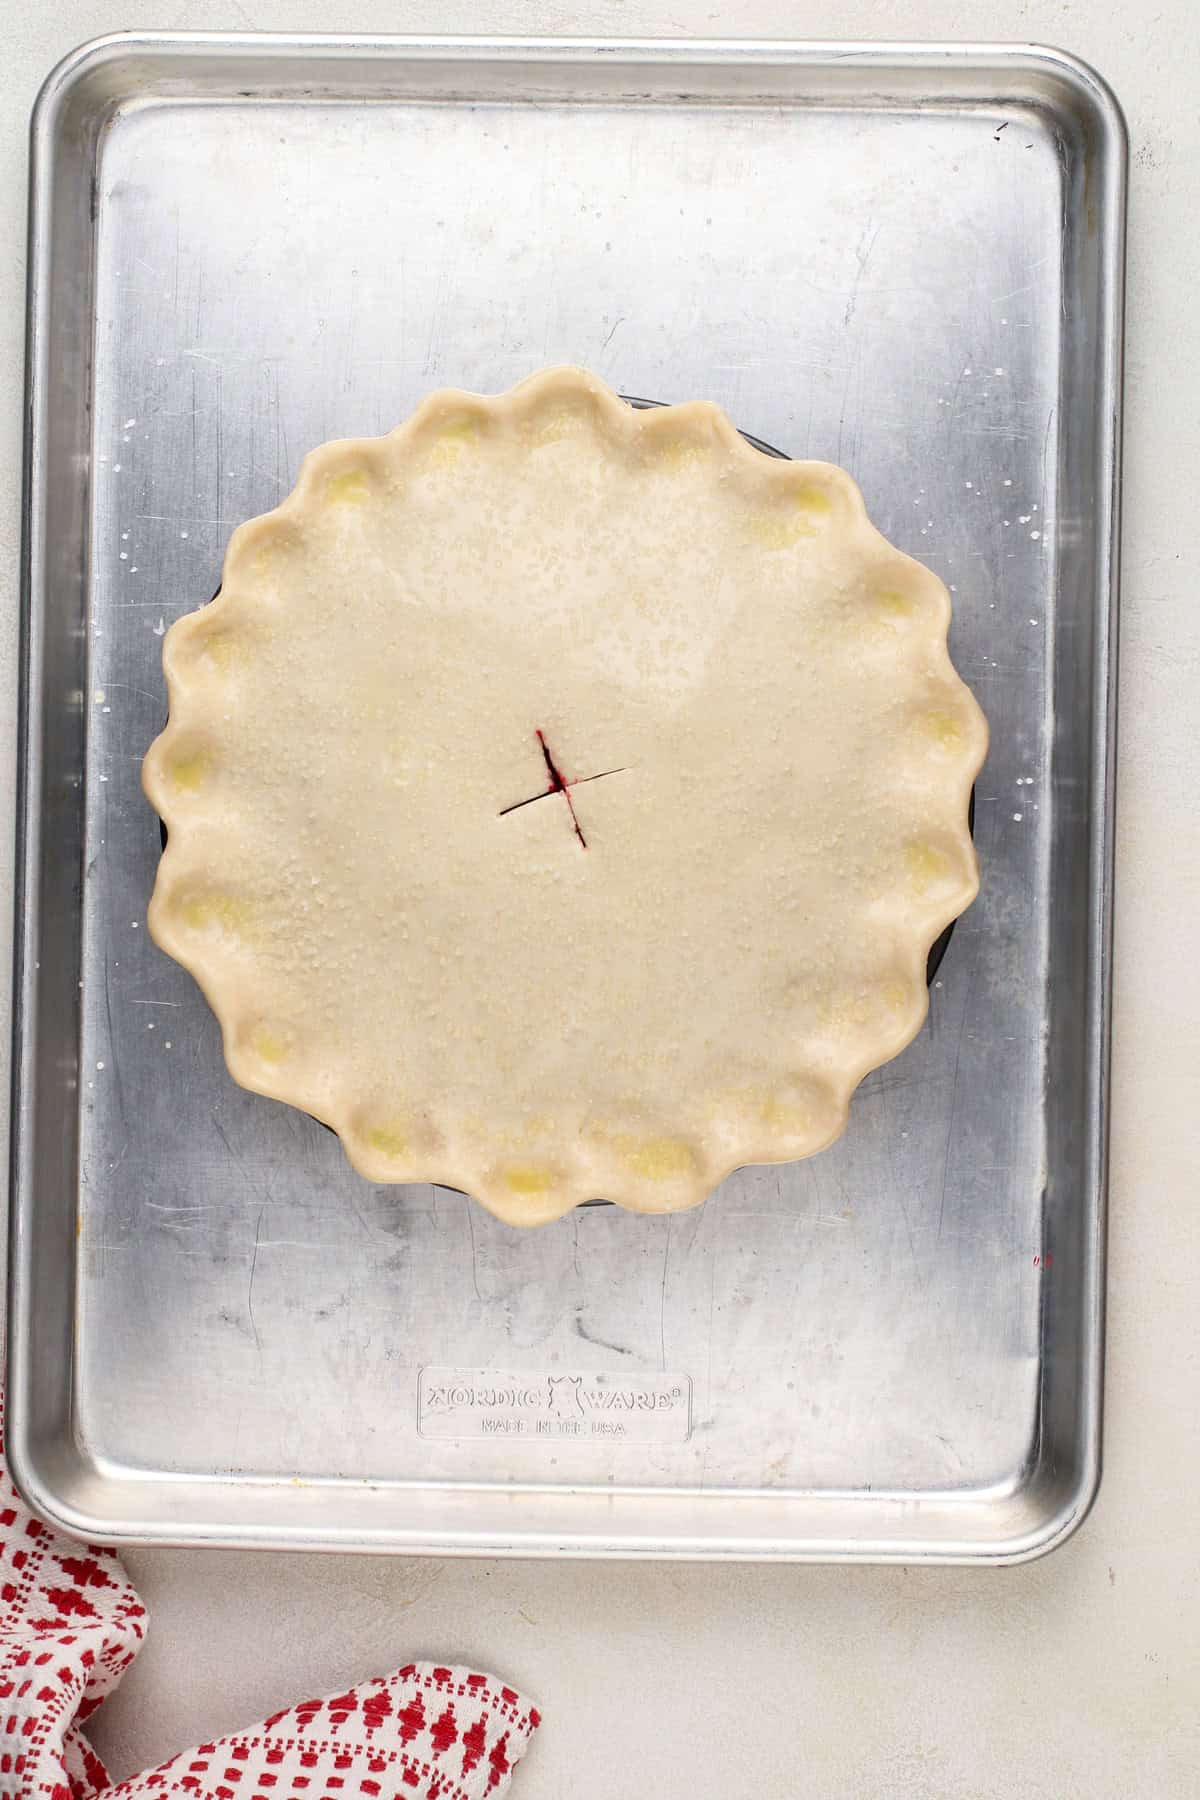 Unbaked sour cherry pie on a baking sheet, ready to go in the oven.